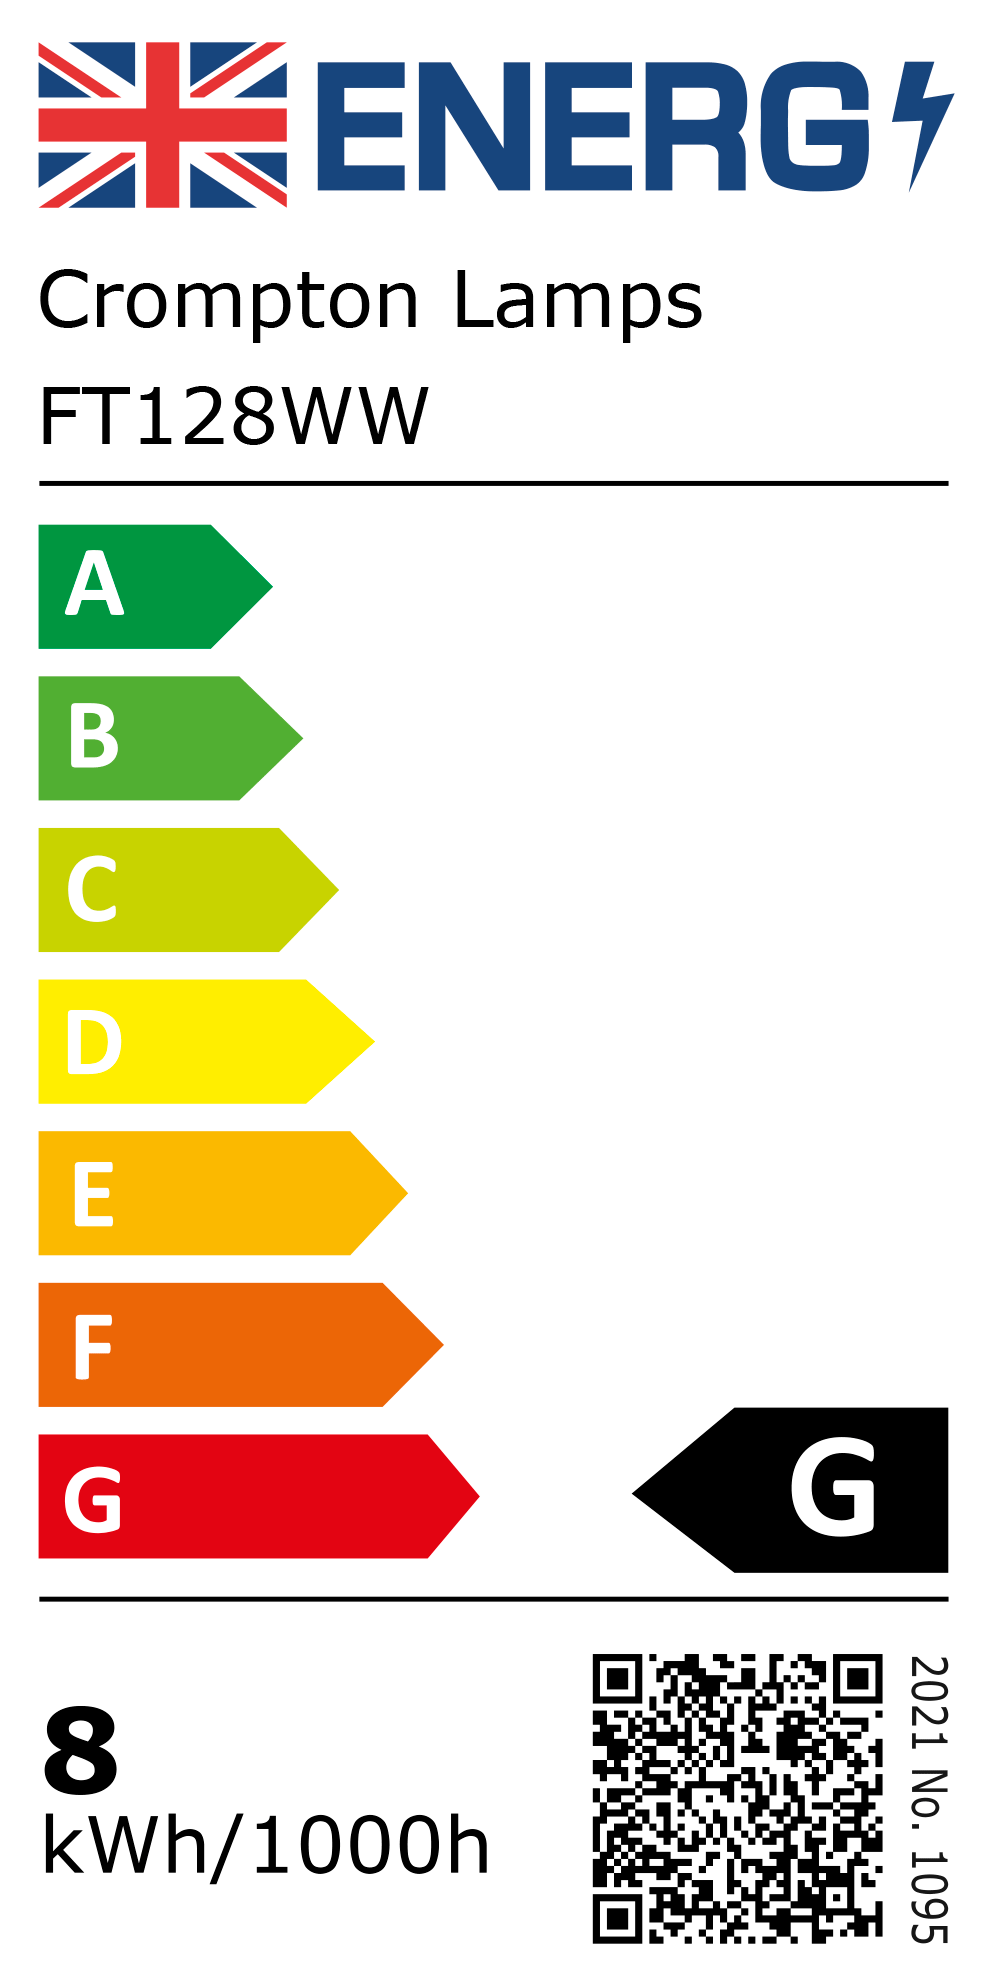 New 2021 Energy Rating Label: MPN FT128WW